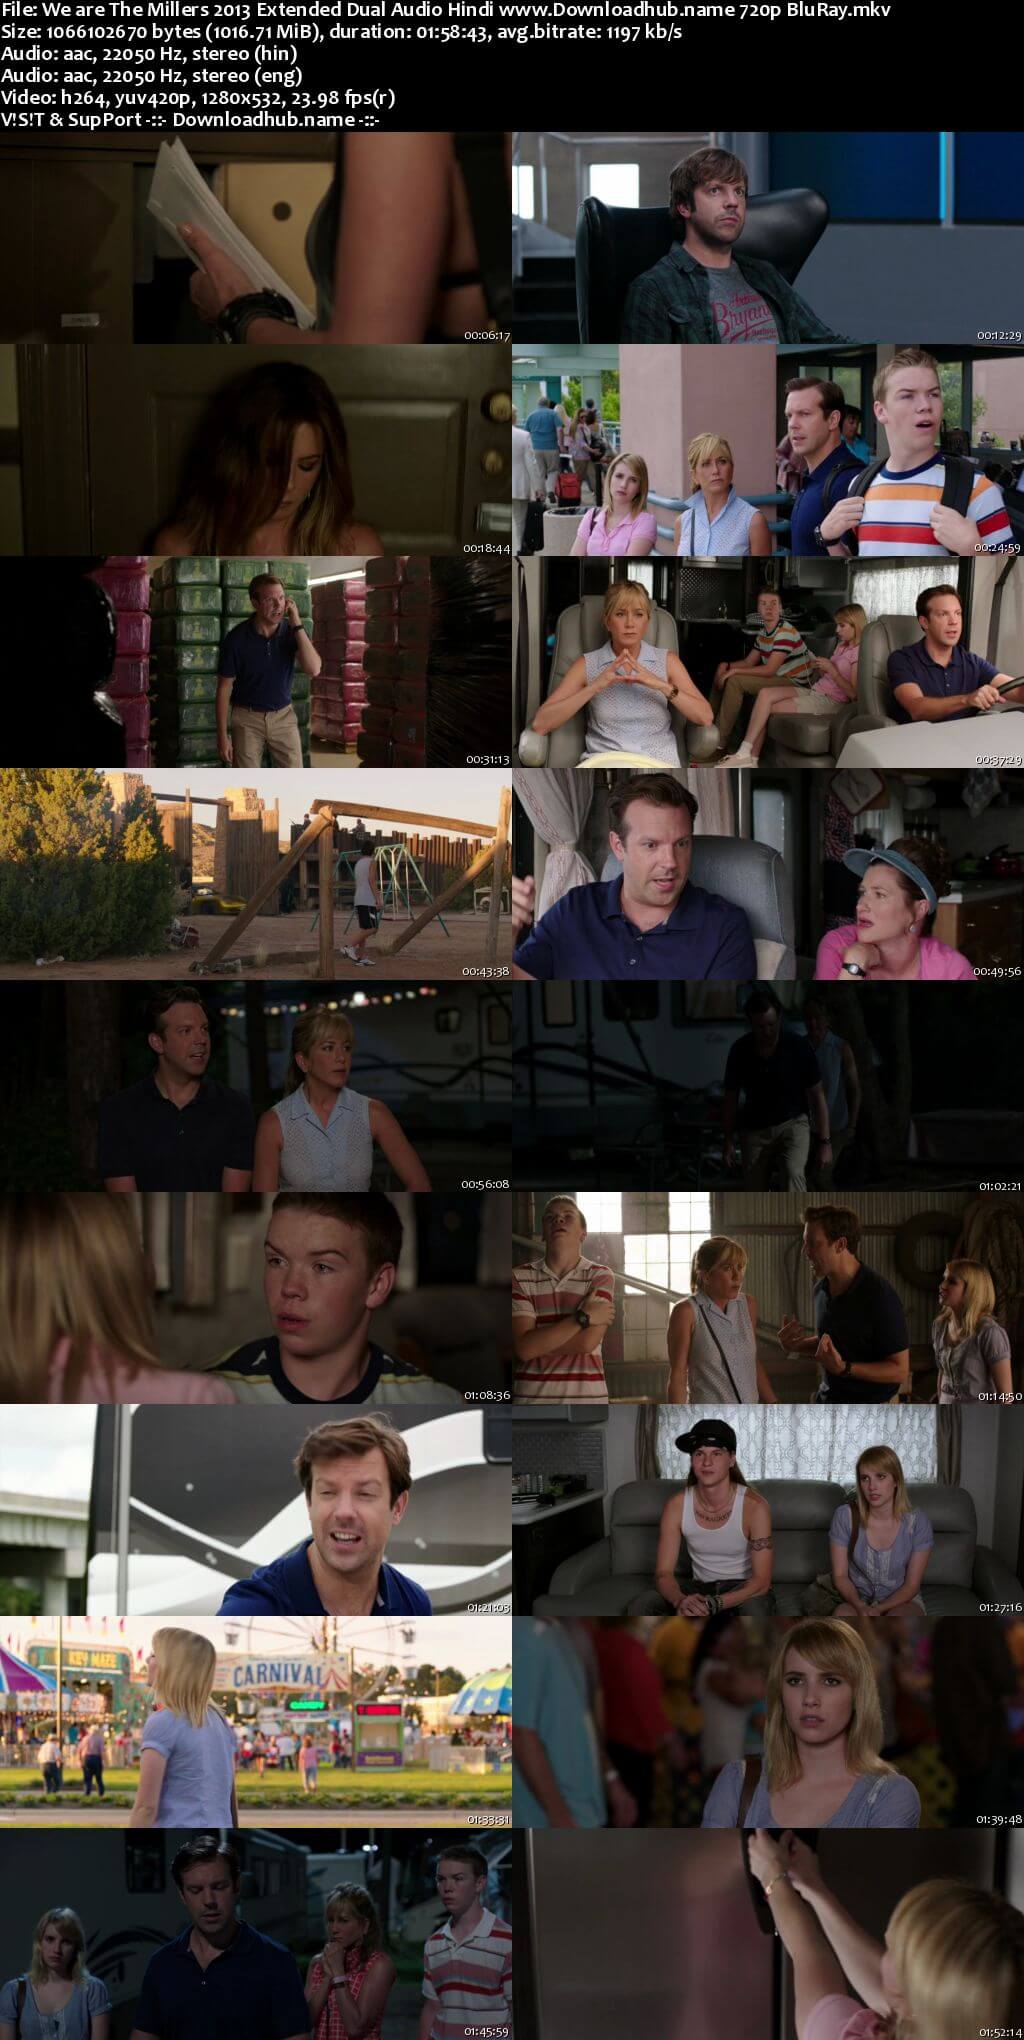 We are the Millers 2013 Hindi Dual Audio 720p EXTENDED BluRay x264